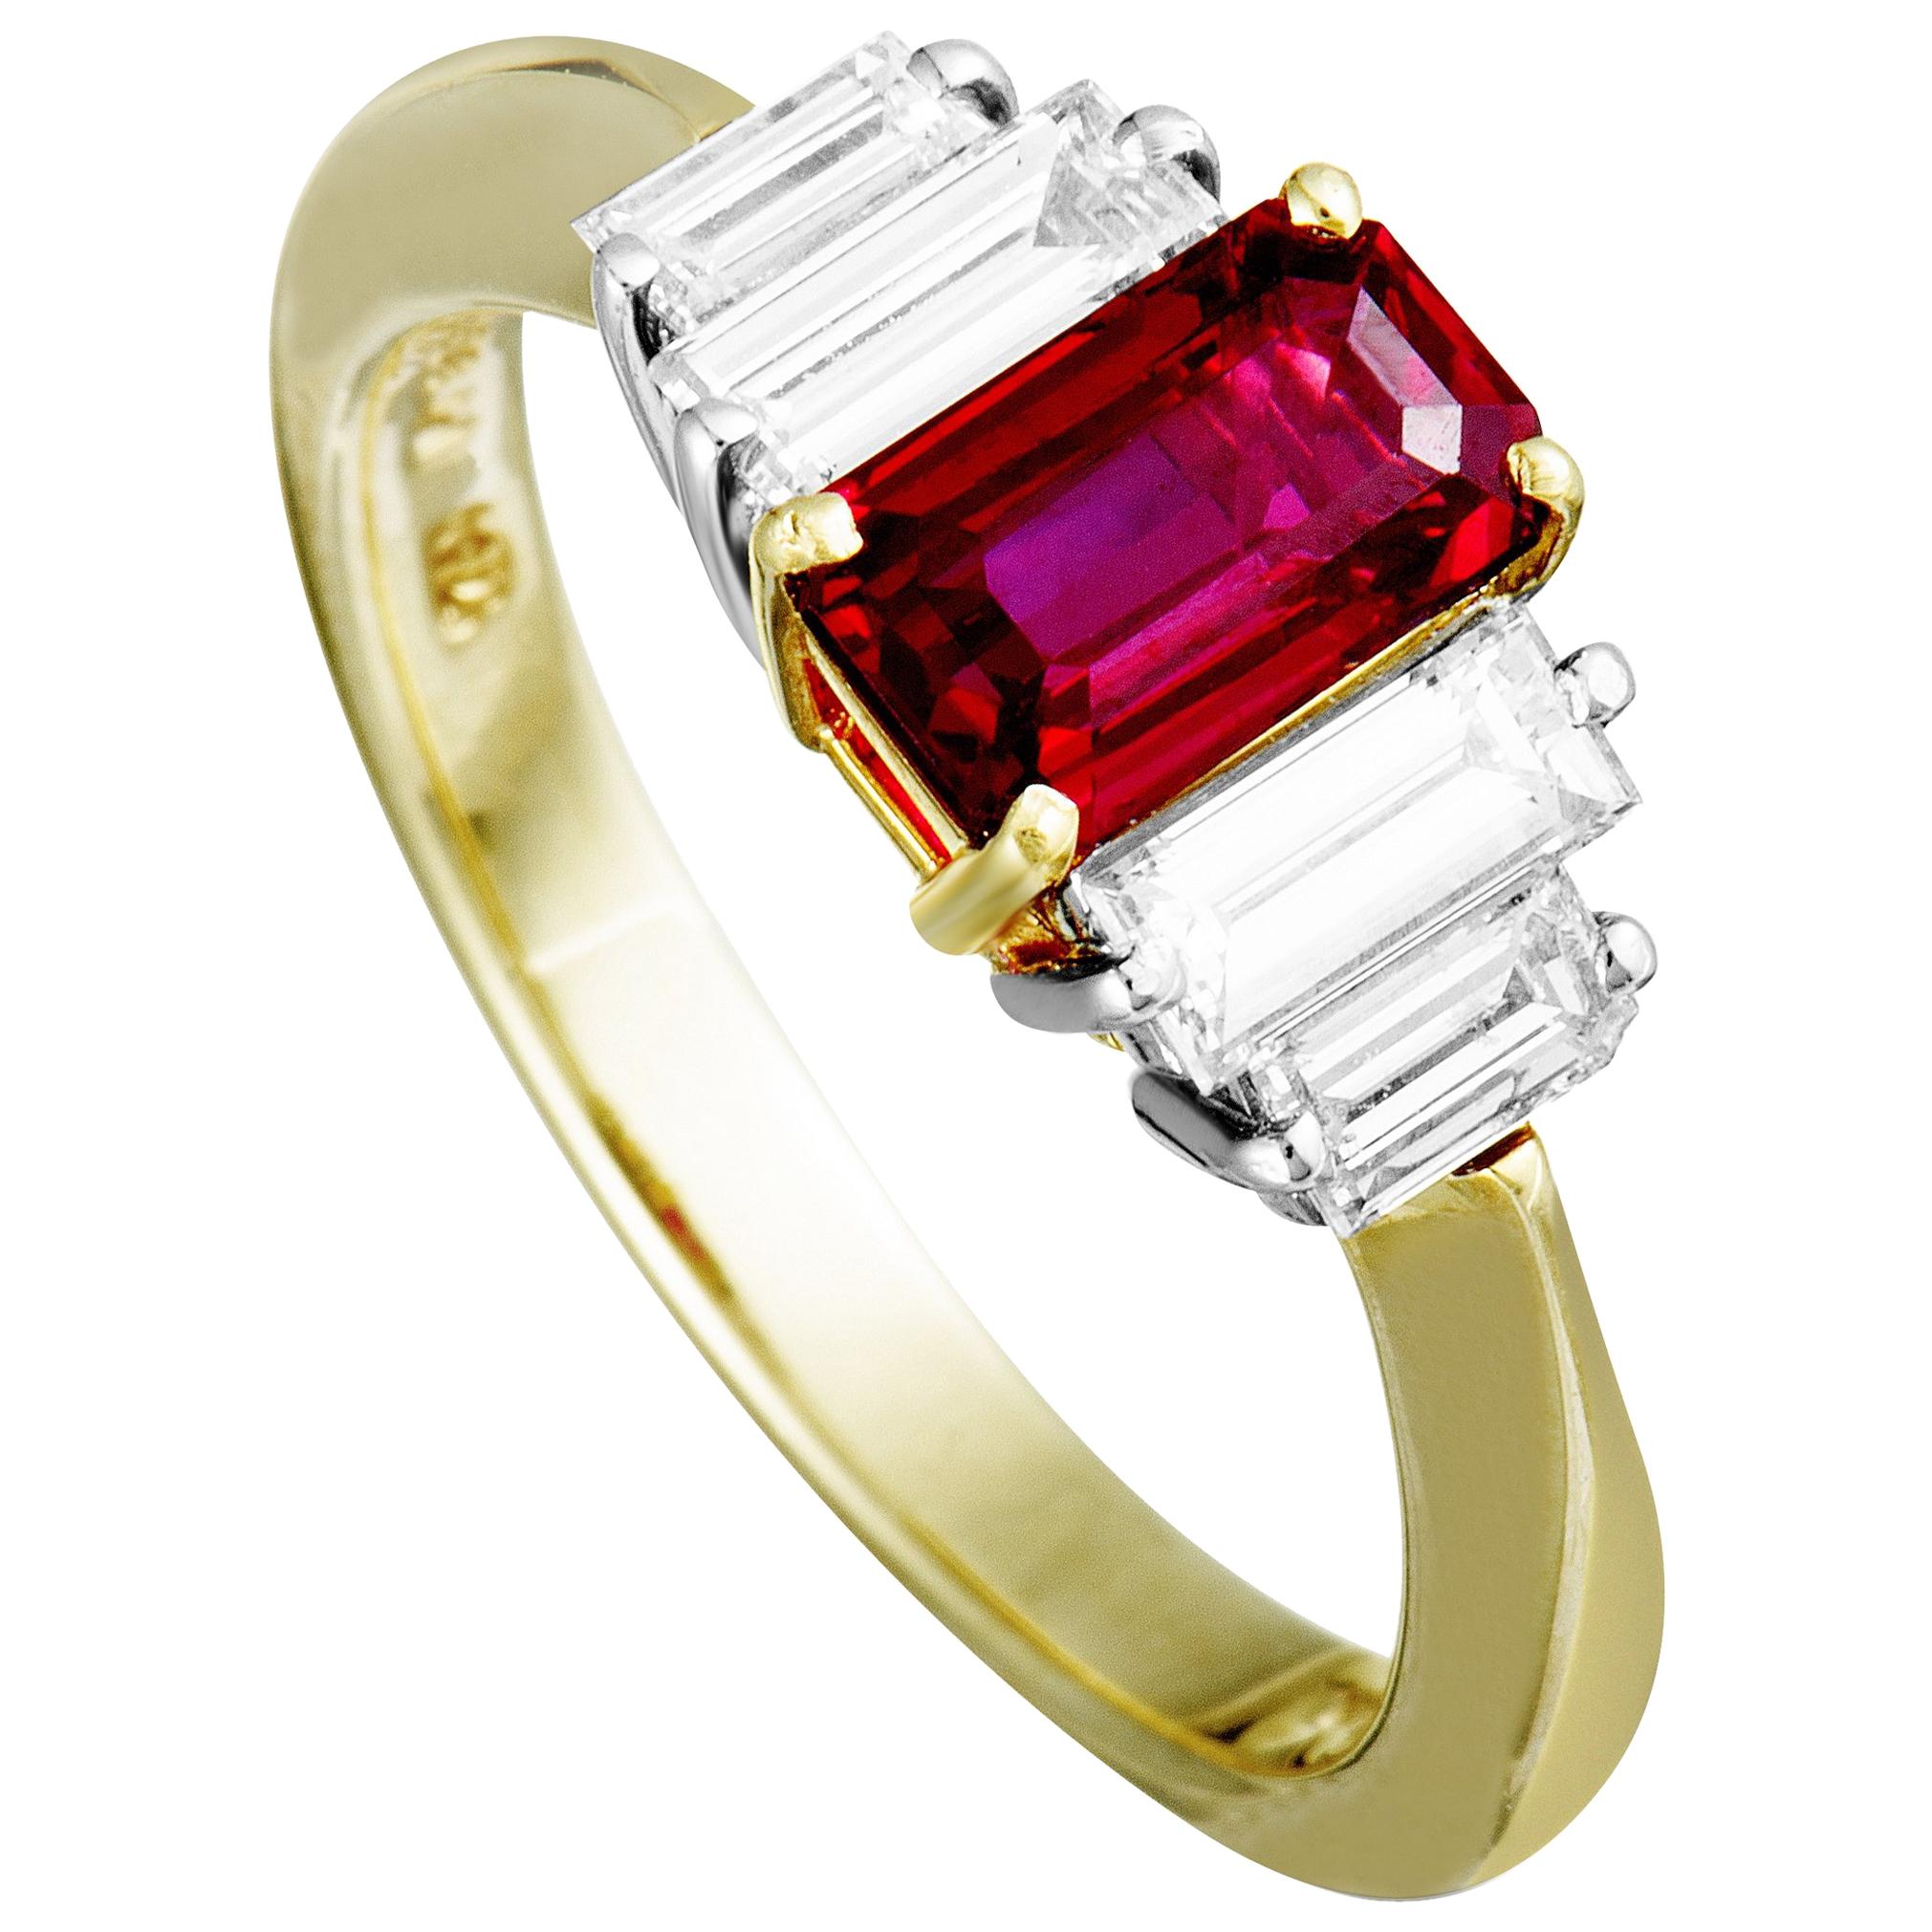 Tiffany & Co. Diamond and Ruby Yellow Gold and Platinum Ring